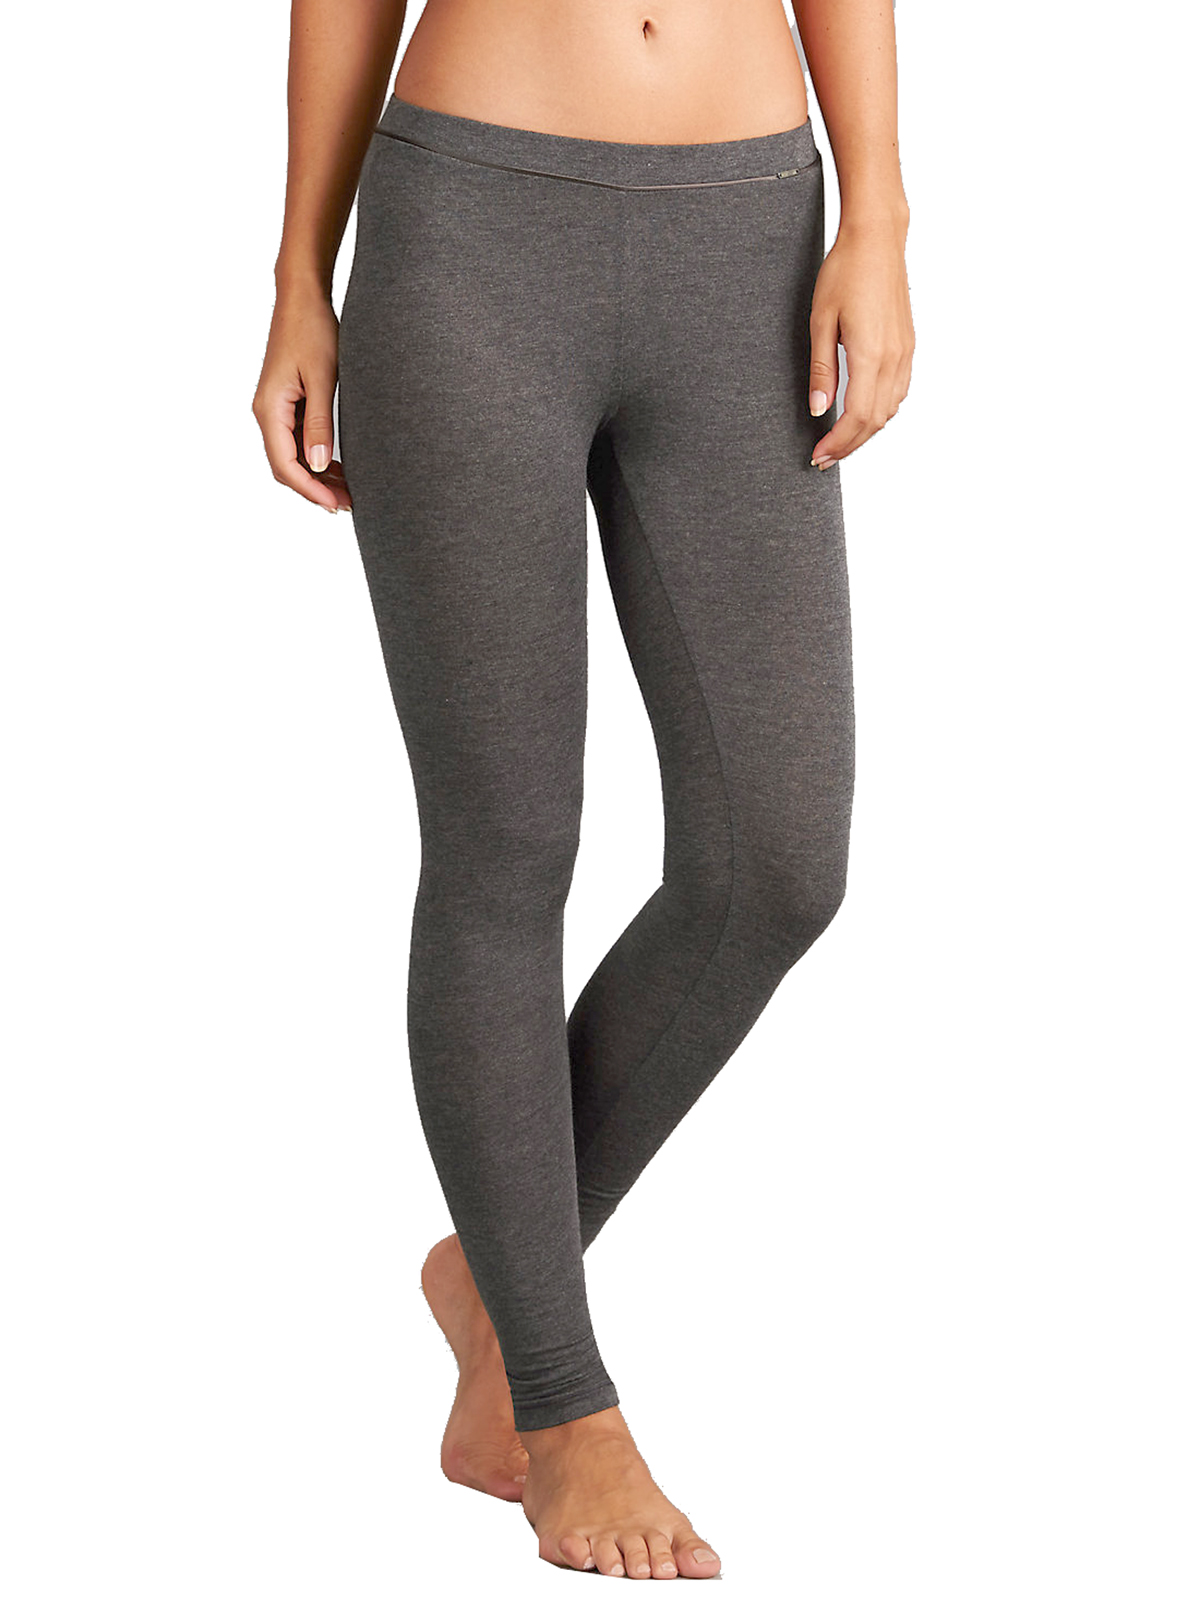 4utograph CHARCOAL Heatgen Thermal Leggings with Cashmere - Size 10 to 22